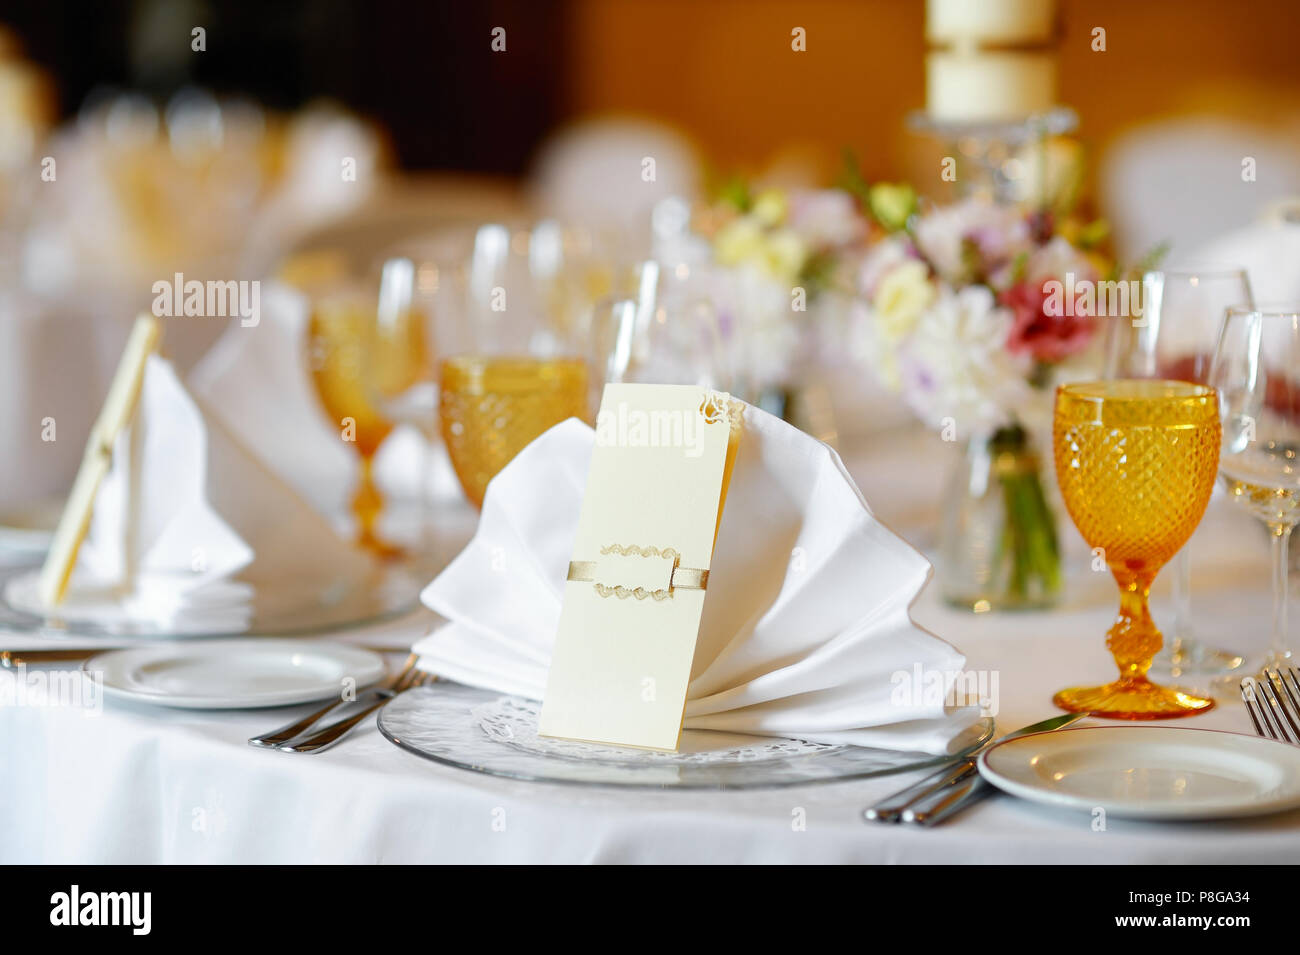 Table set for an event party or wedding reception Stock Photo